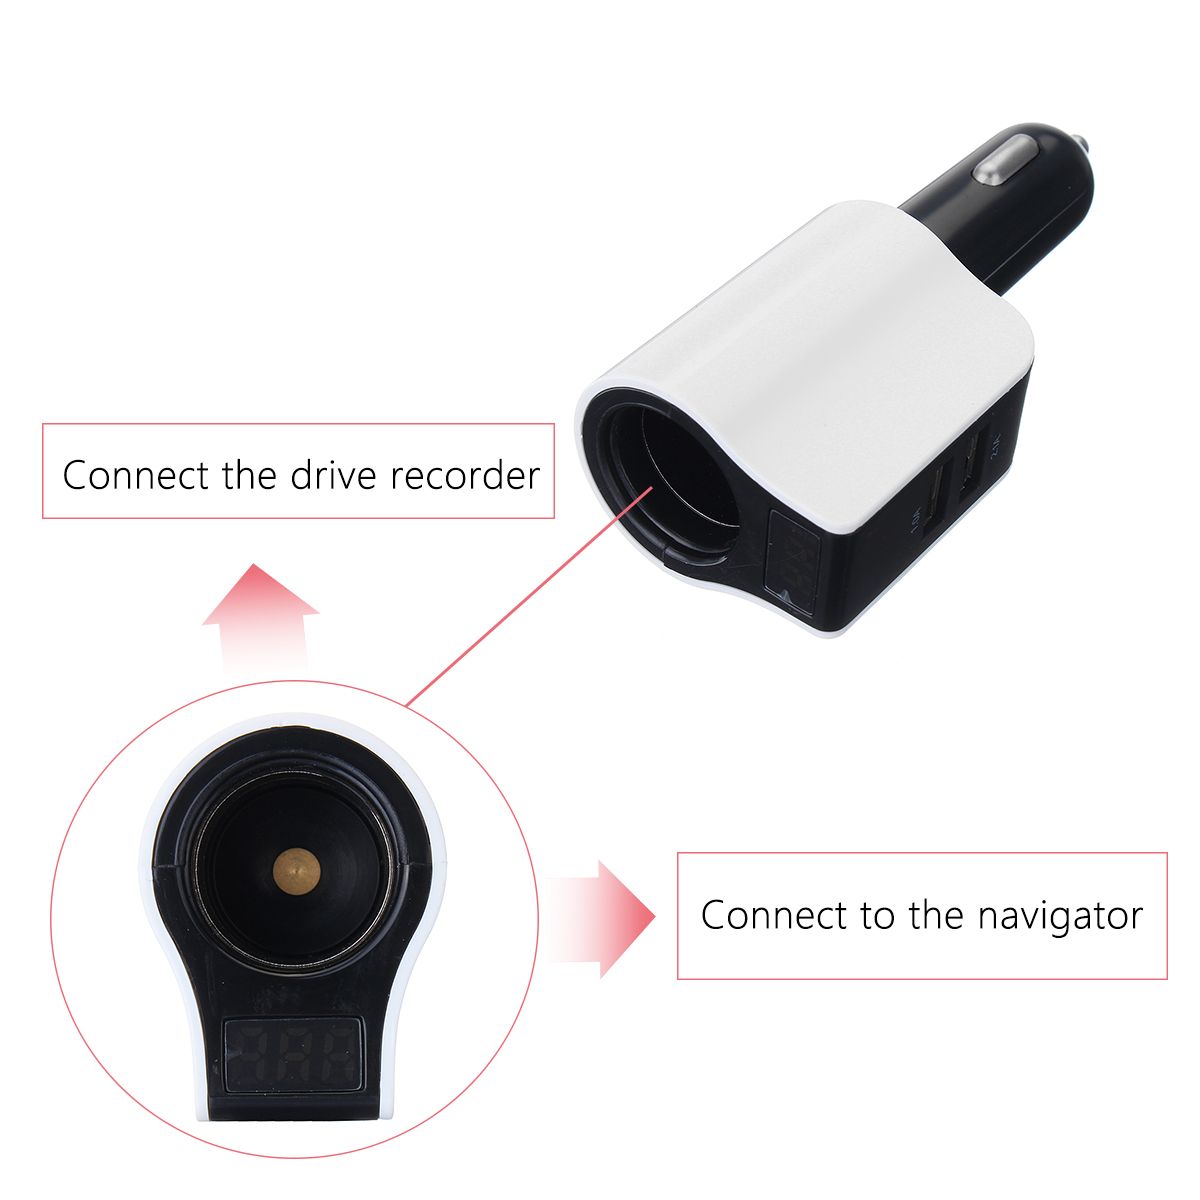 Dual-USB-Car-Charger-Adapter-LED-Display-Fast-Charging-for-Phone-Pad-GPS-31A-1225797